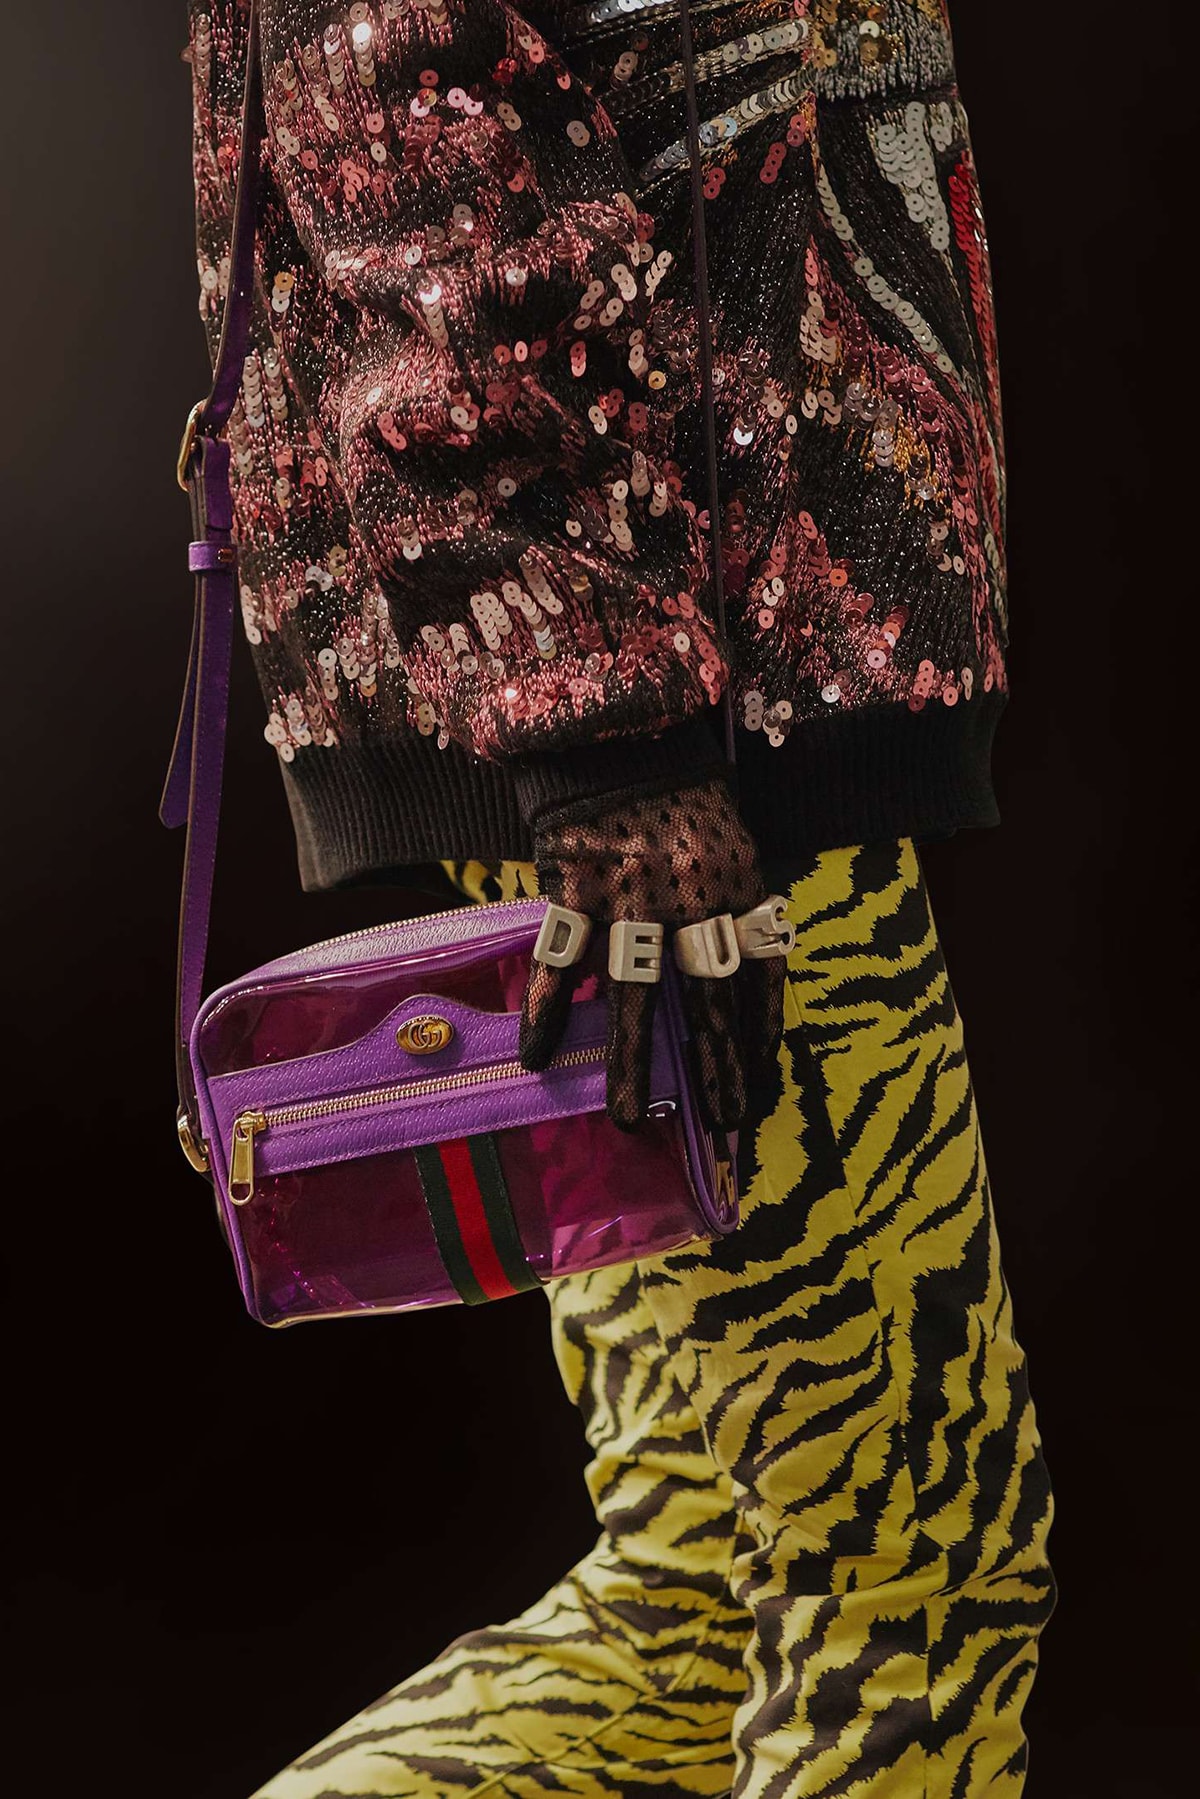 Gucci Cruise 2019 Runway Details PVC Ophidia Bag Purple Yellow Pants Sequin